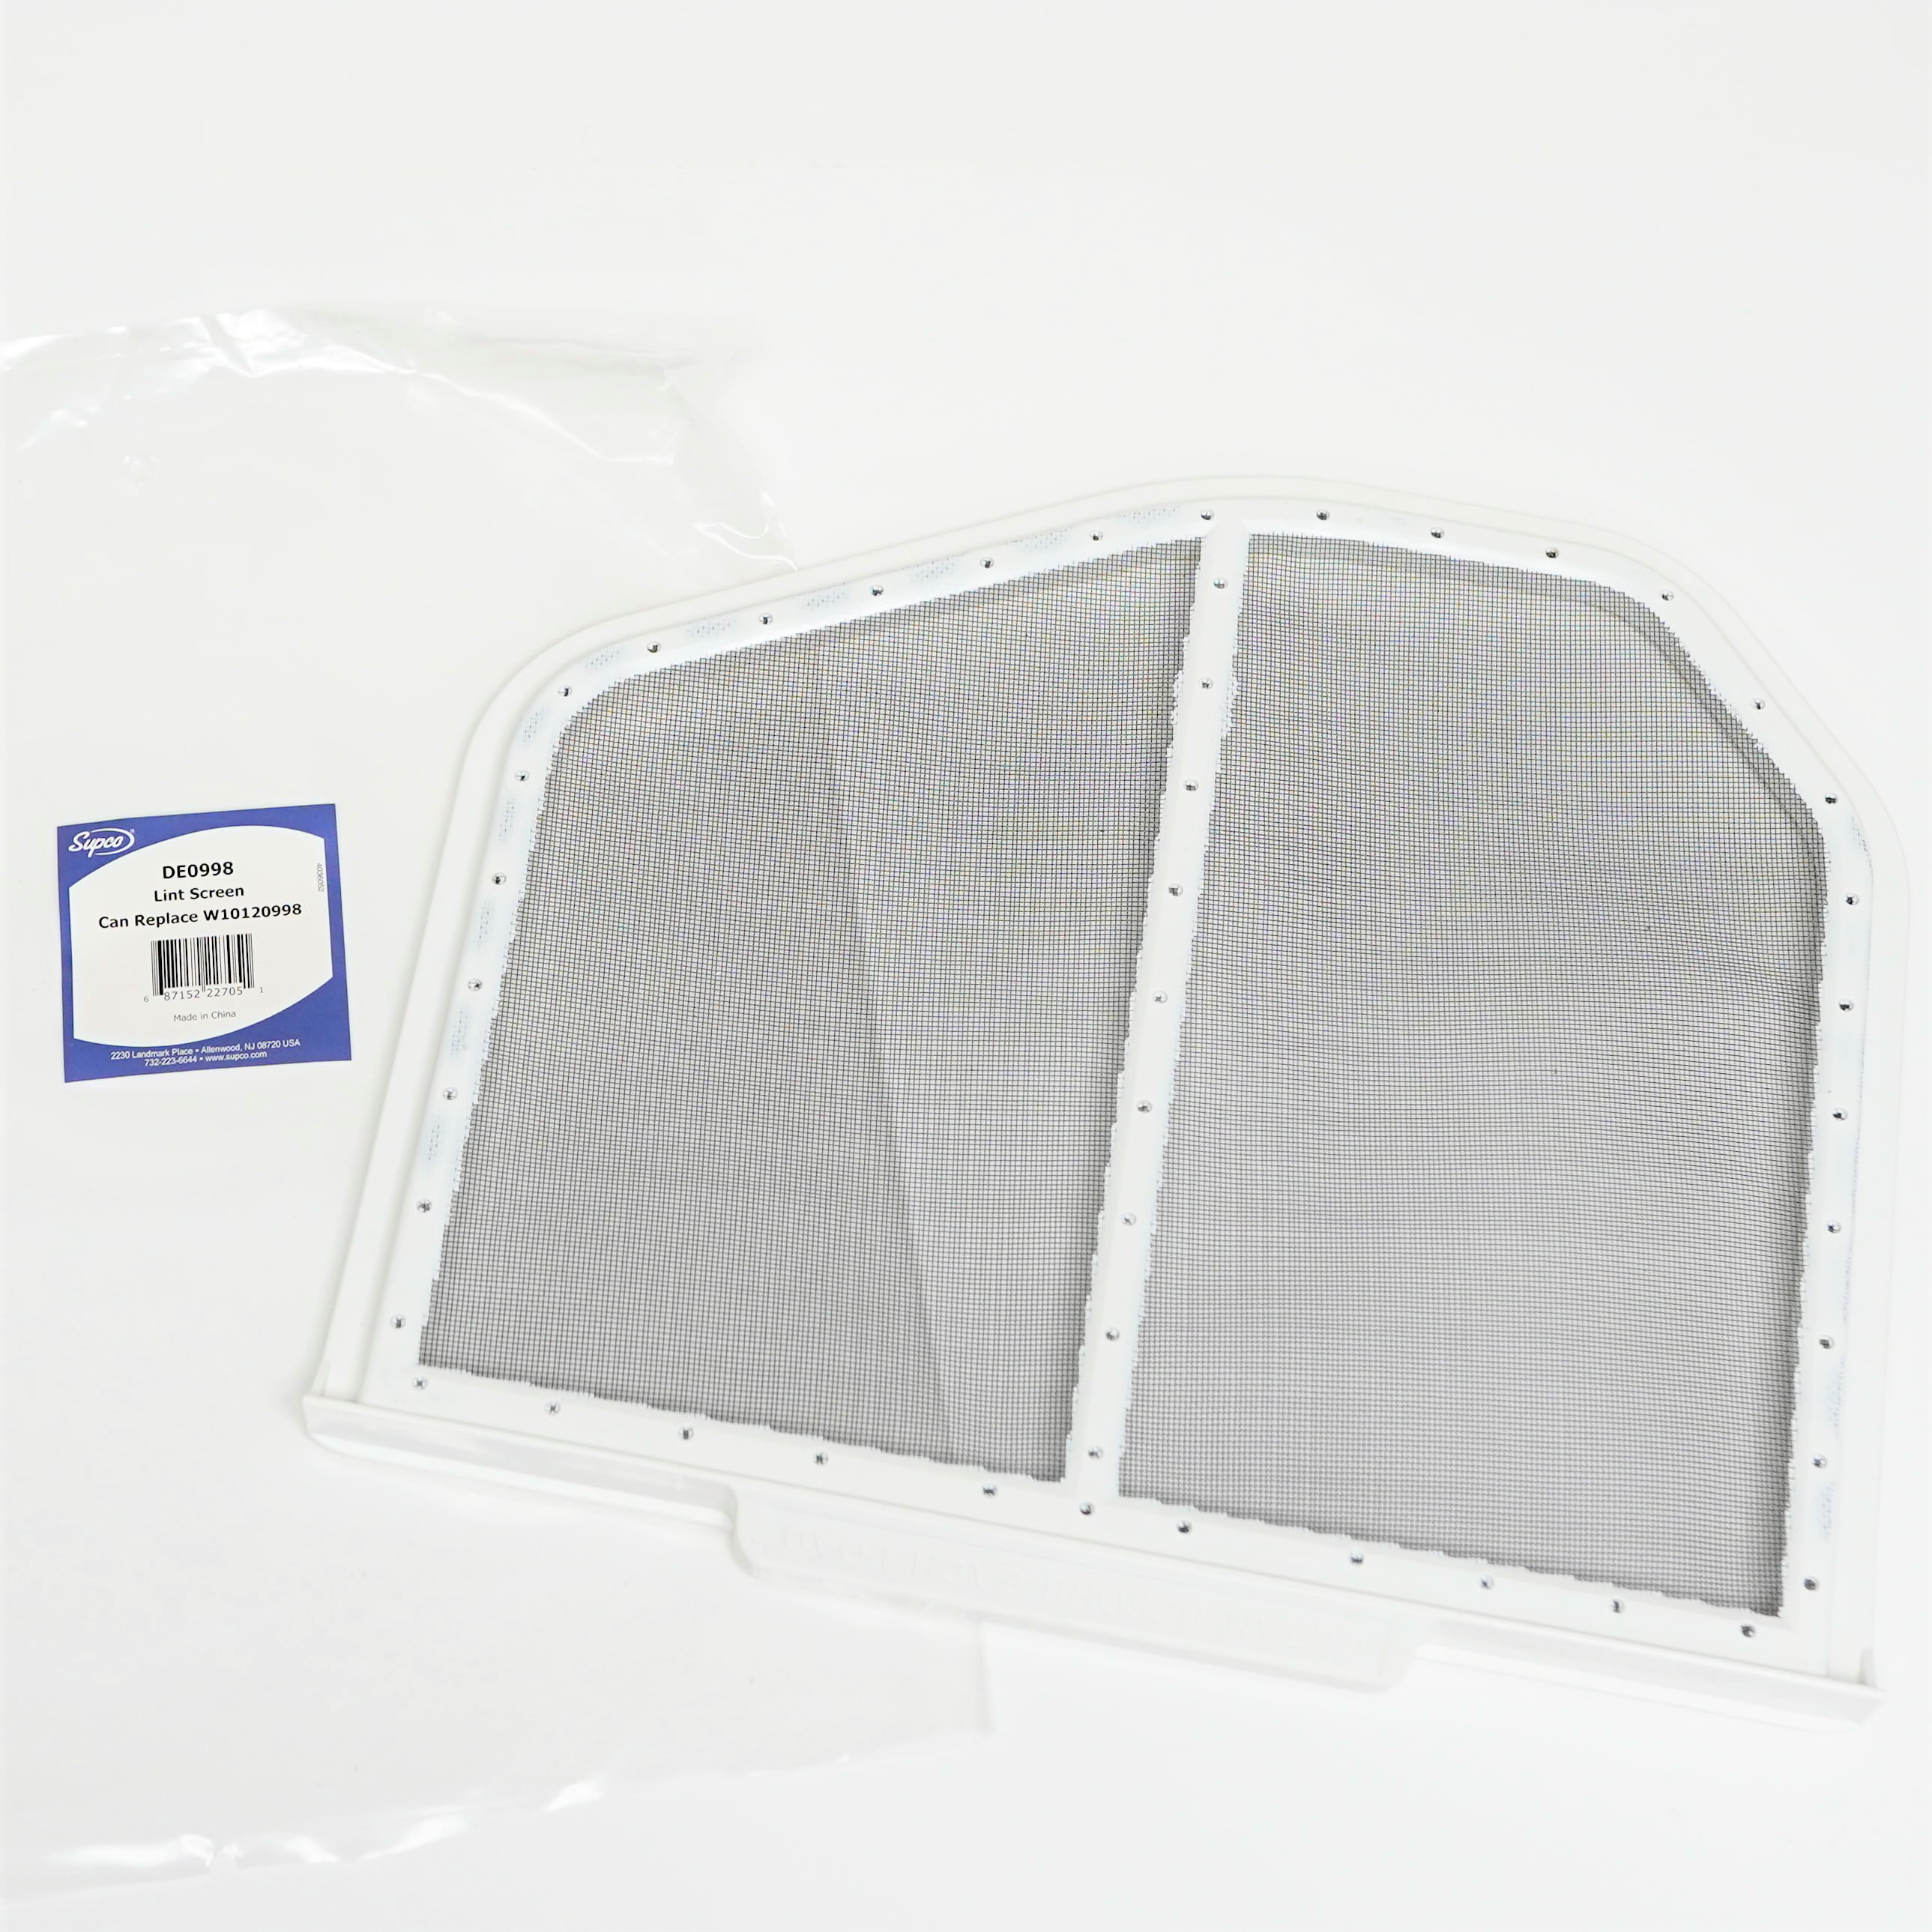 Details about   8531964 Genuine OEM Whirlpool FSP Dryer Filter Lint Screen Cover W1081239 